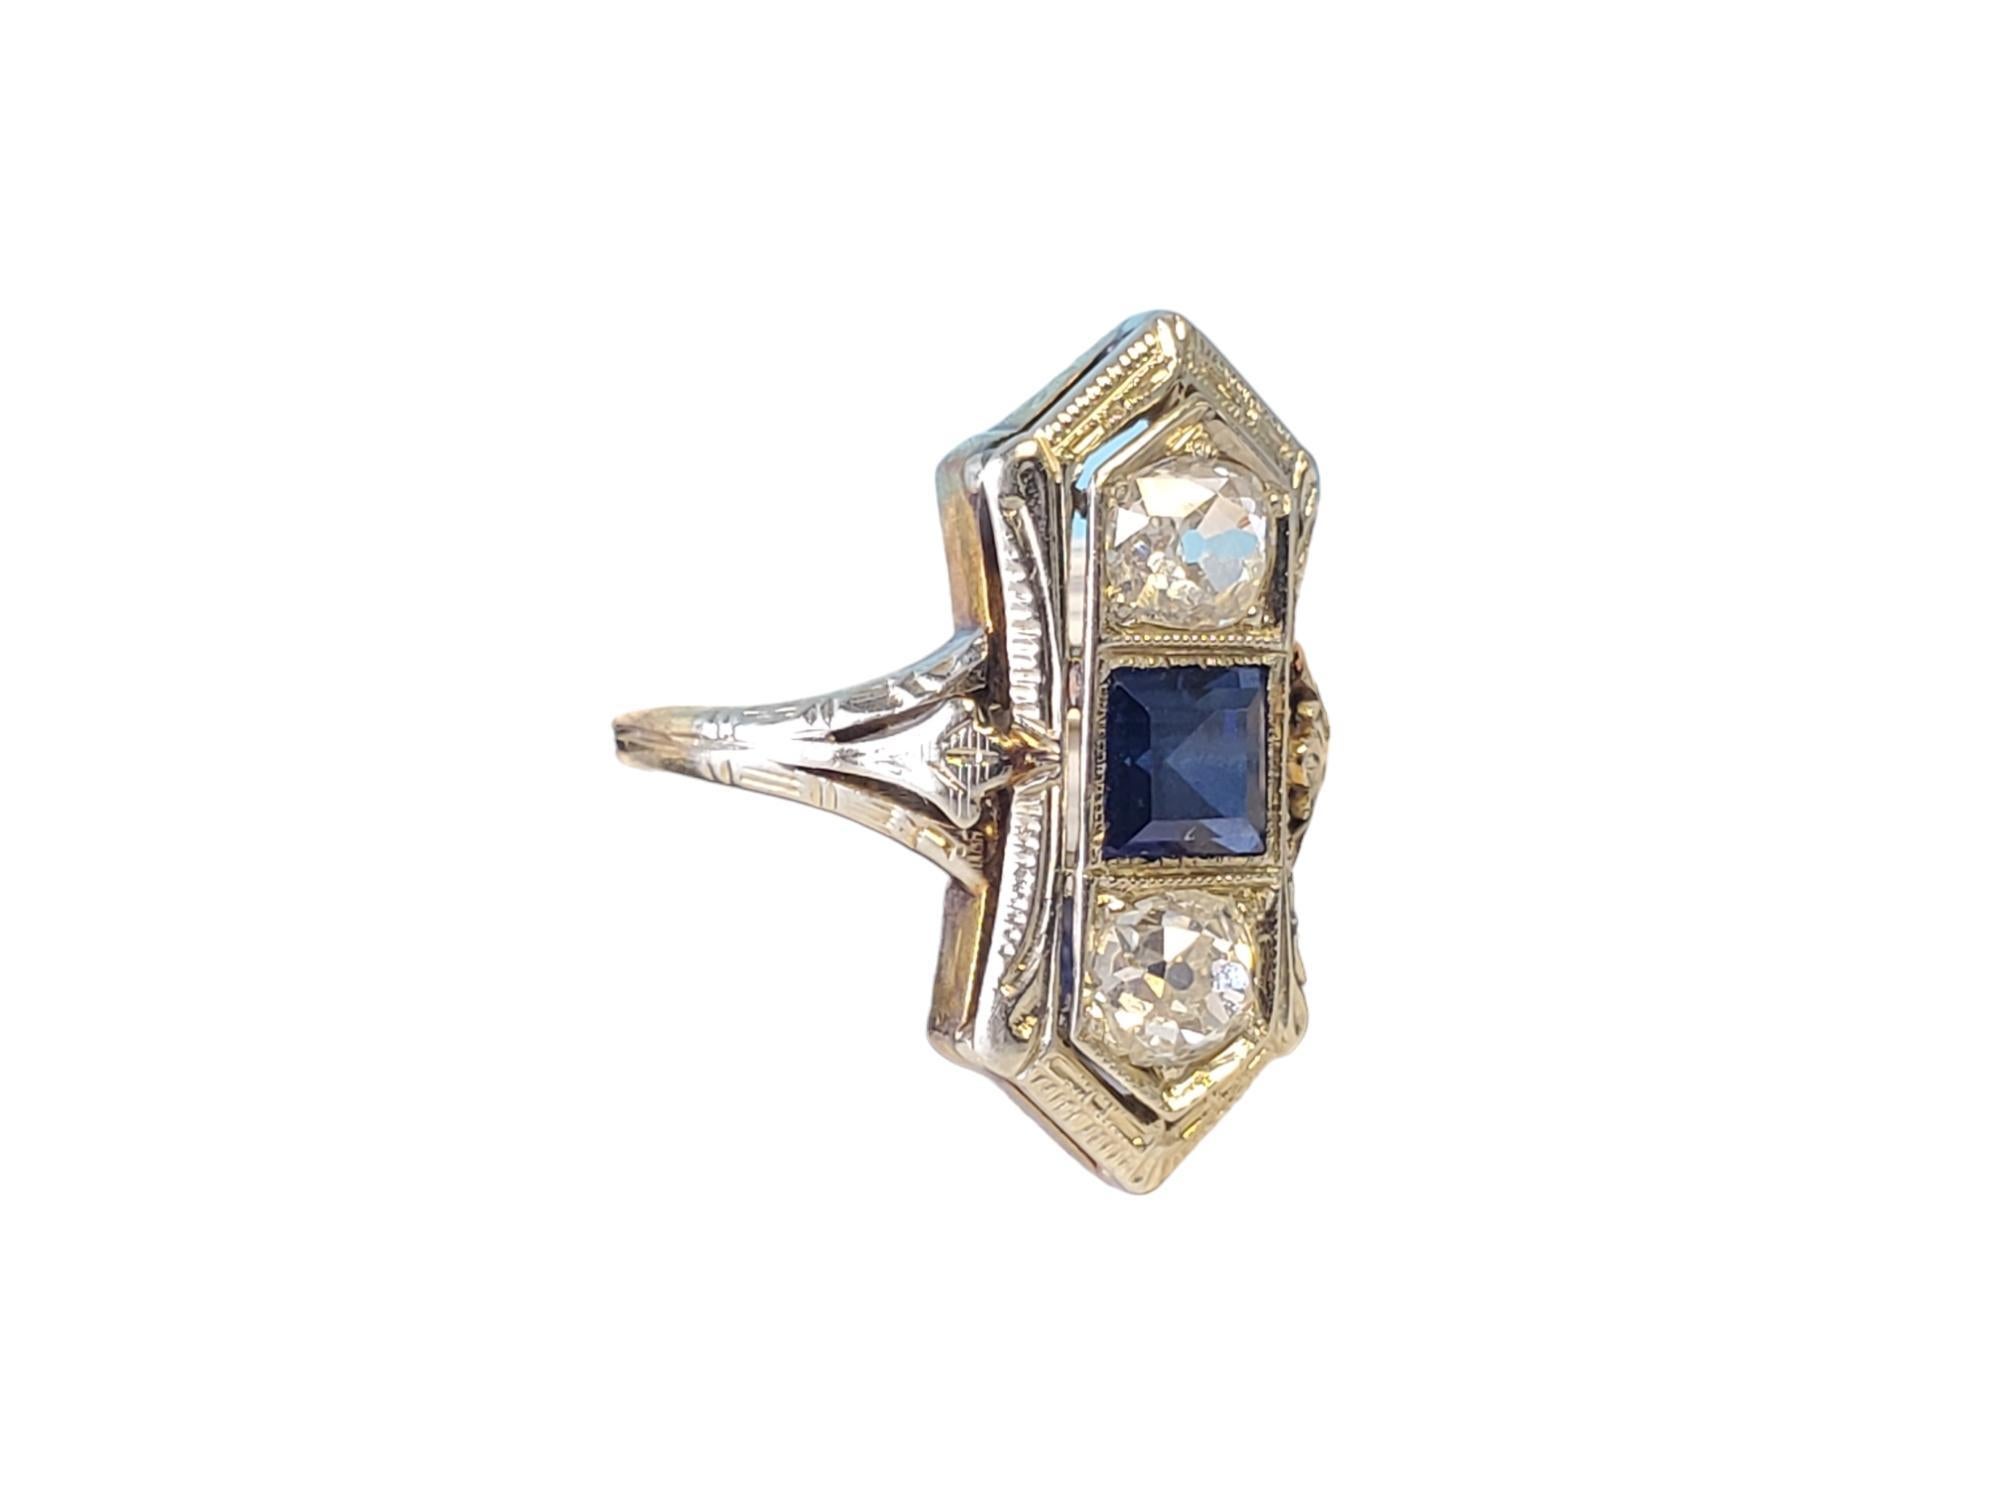 Art Deco 3 Stone Diamond and Sapphire Ring

Listed is a deco 3 stone old euro ring with blue sapphire in the center. The sapphire appears to be synthetic flanked by .33ct each G-I color old cut diamonds that are eye clean and white The ring has a